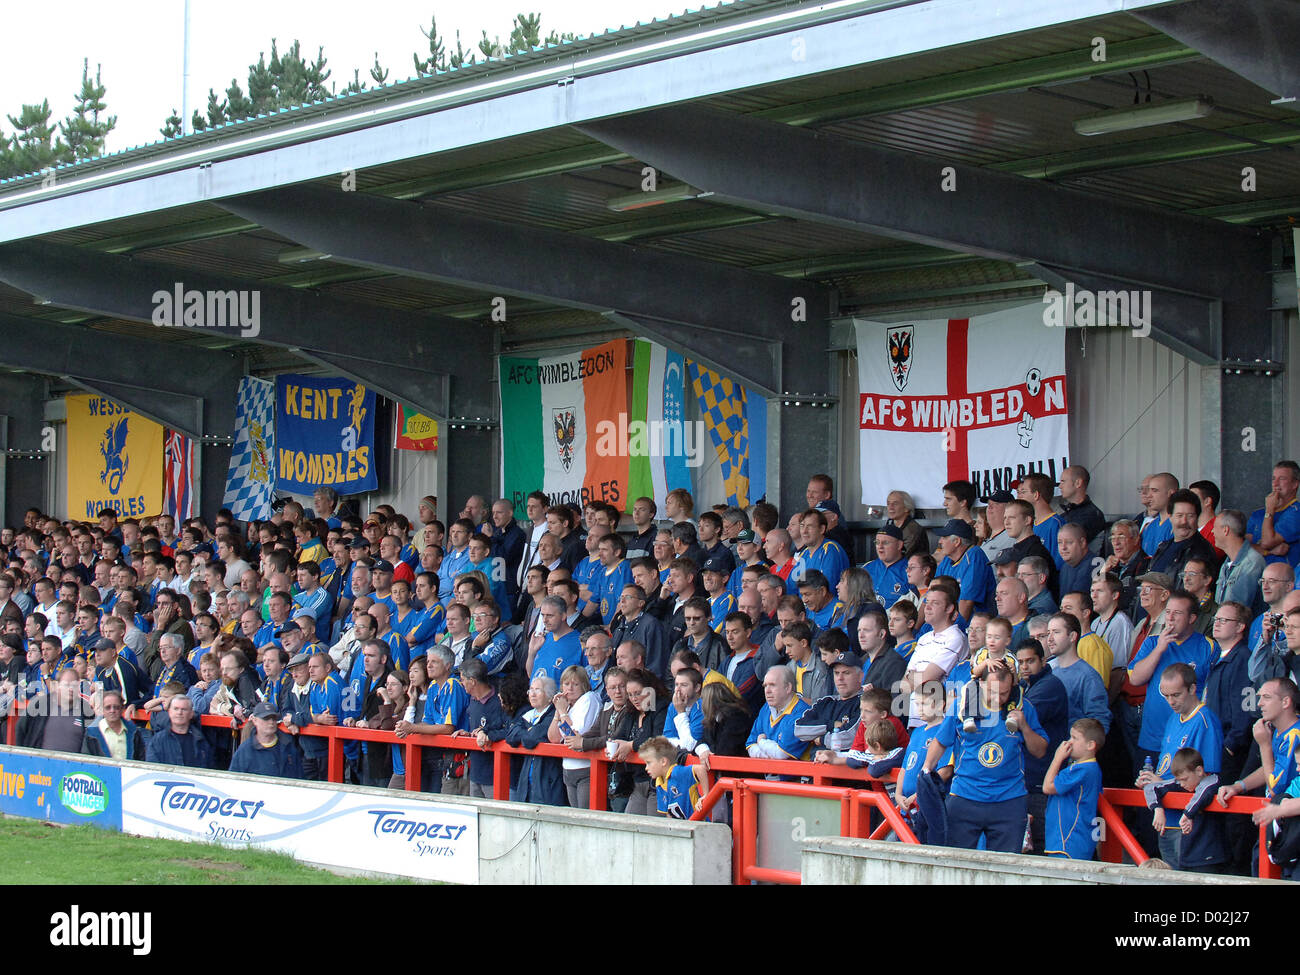 Kingston upon Thames, England. AFC Wimbledon supporters at their current Kingsmeadow stadium. Stock Photo